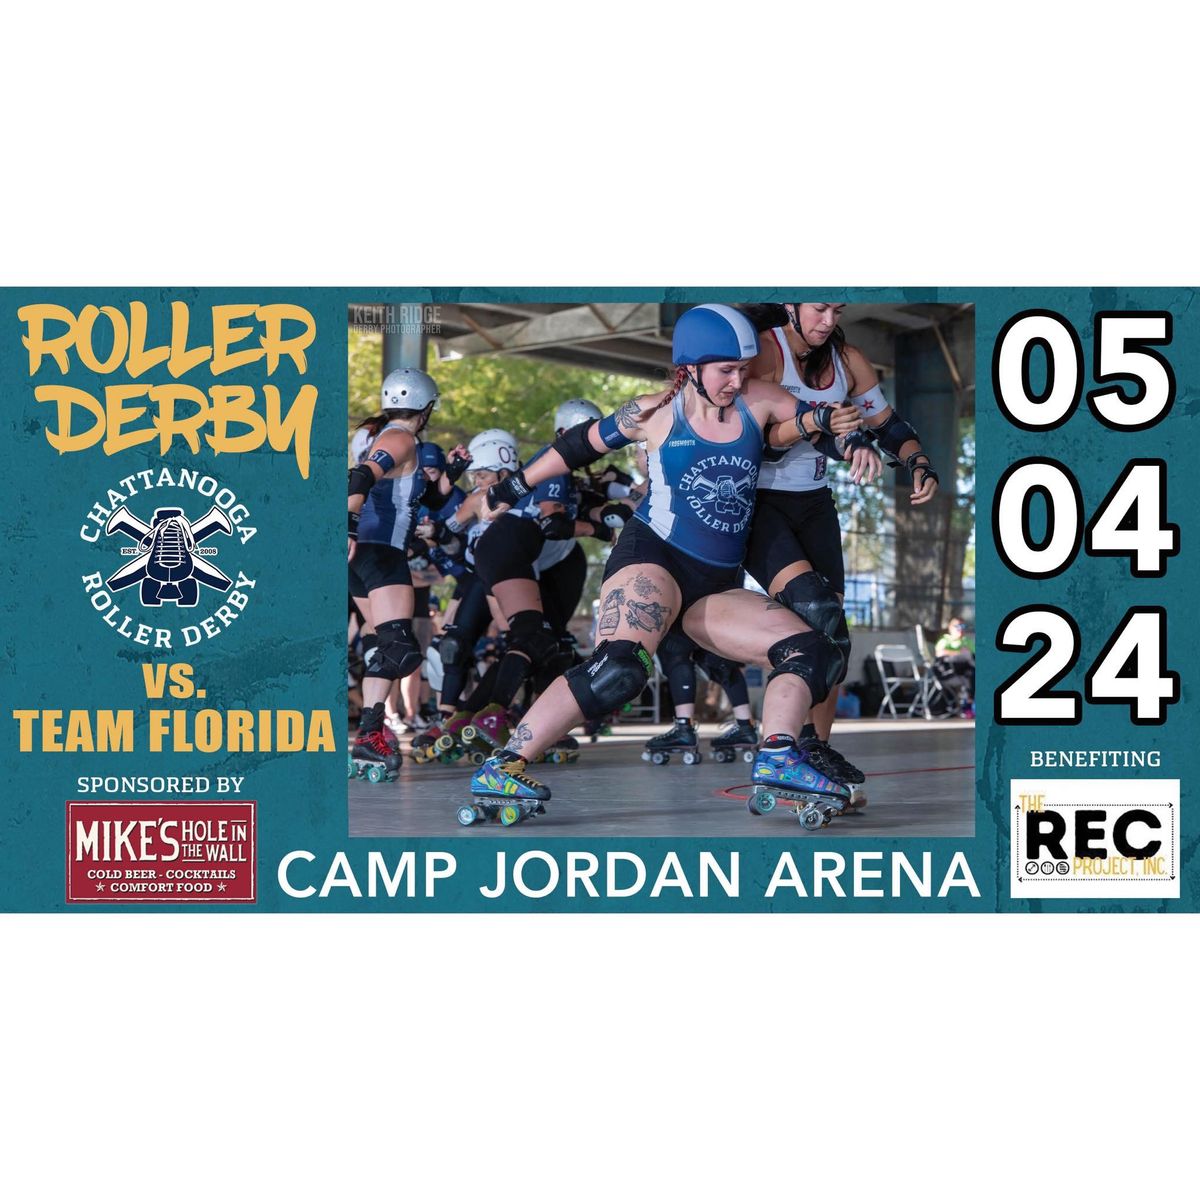 May 4th Chattanooga Roller Derby @ Camp Jordan Arena